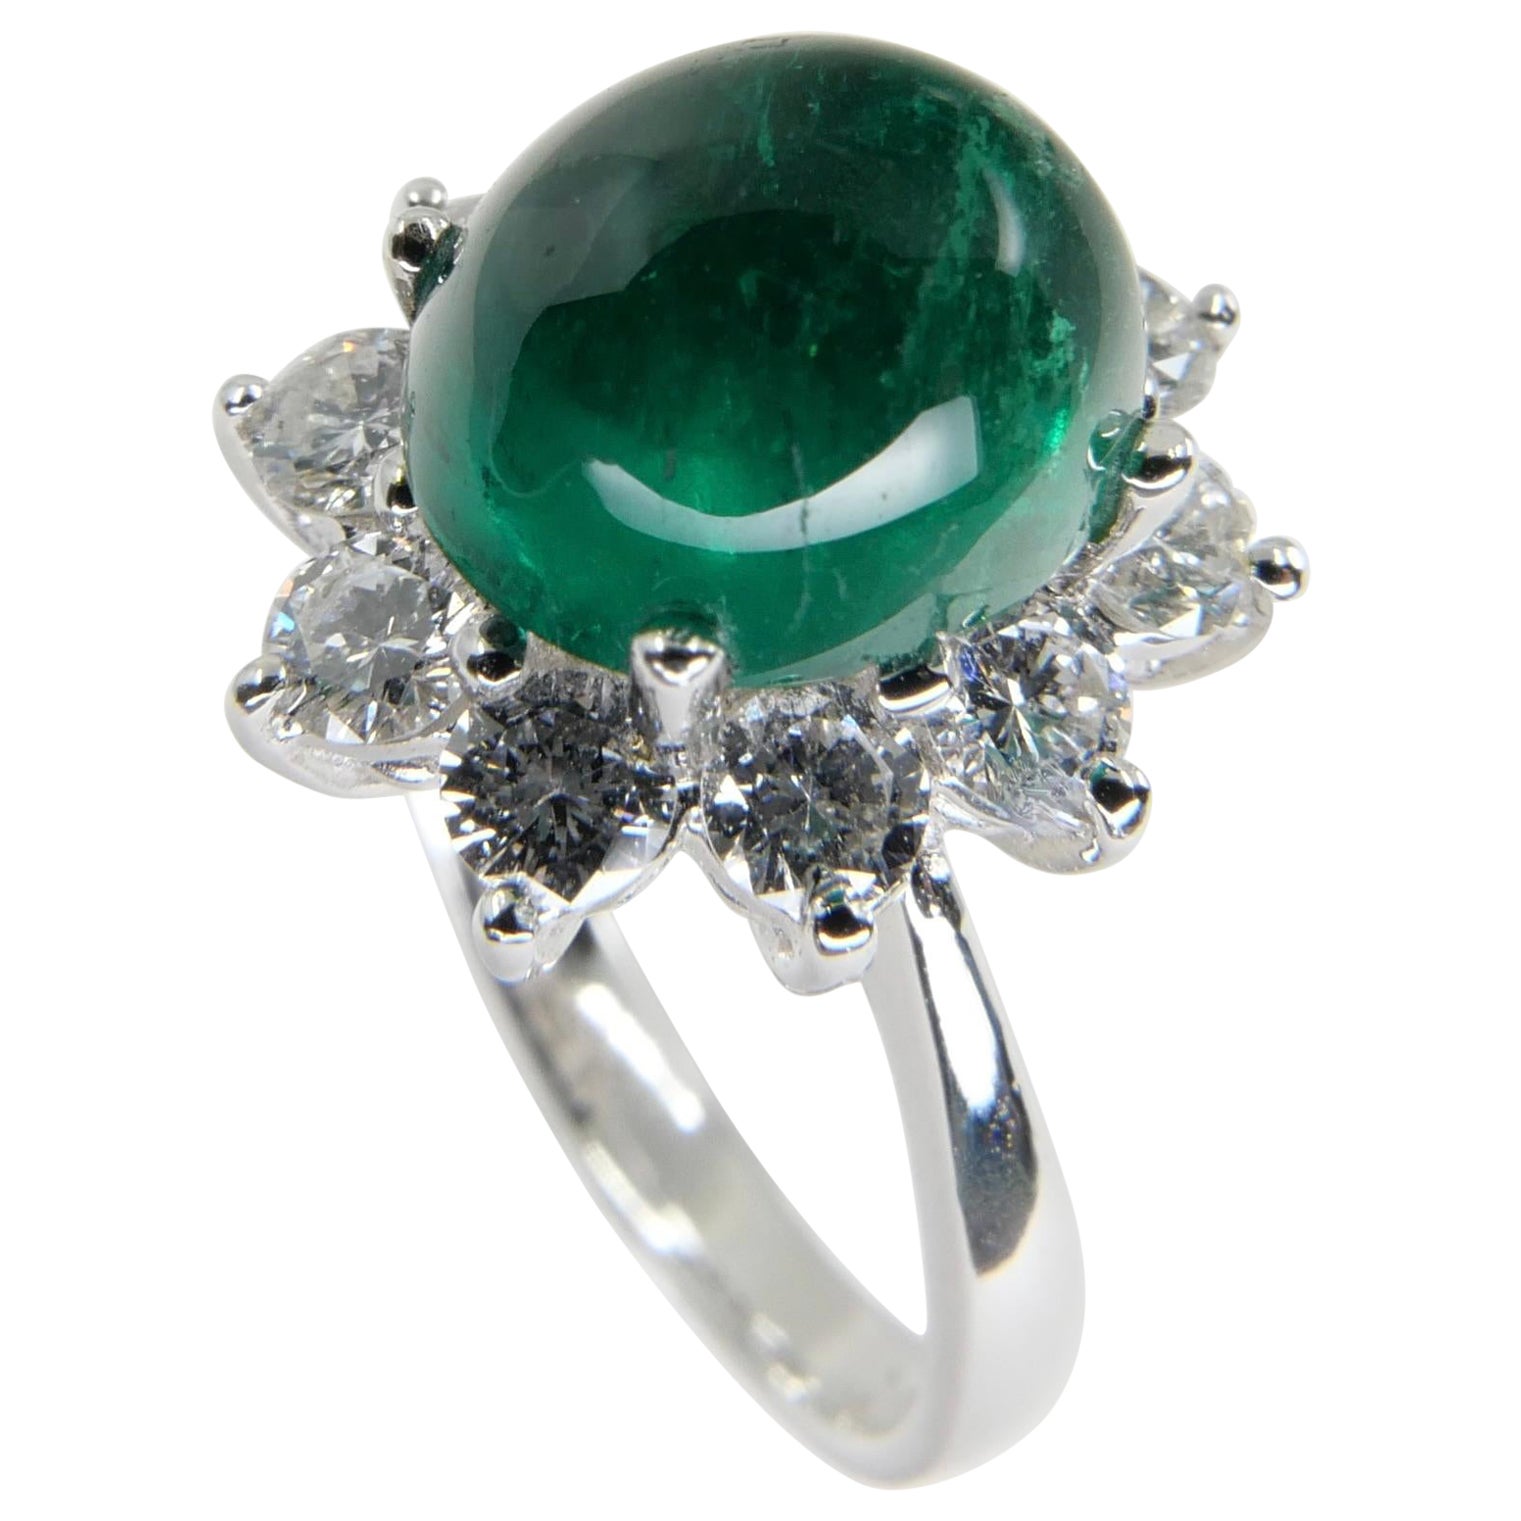 GRS Certified 2.72 Cts Columbian Minor Muzo Emerald Ring. Special Appendix 